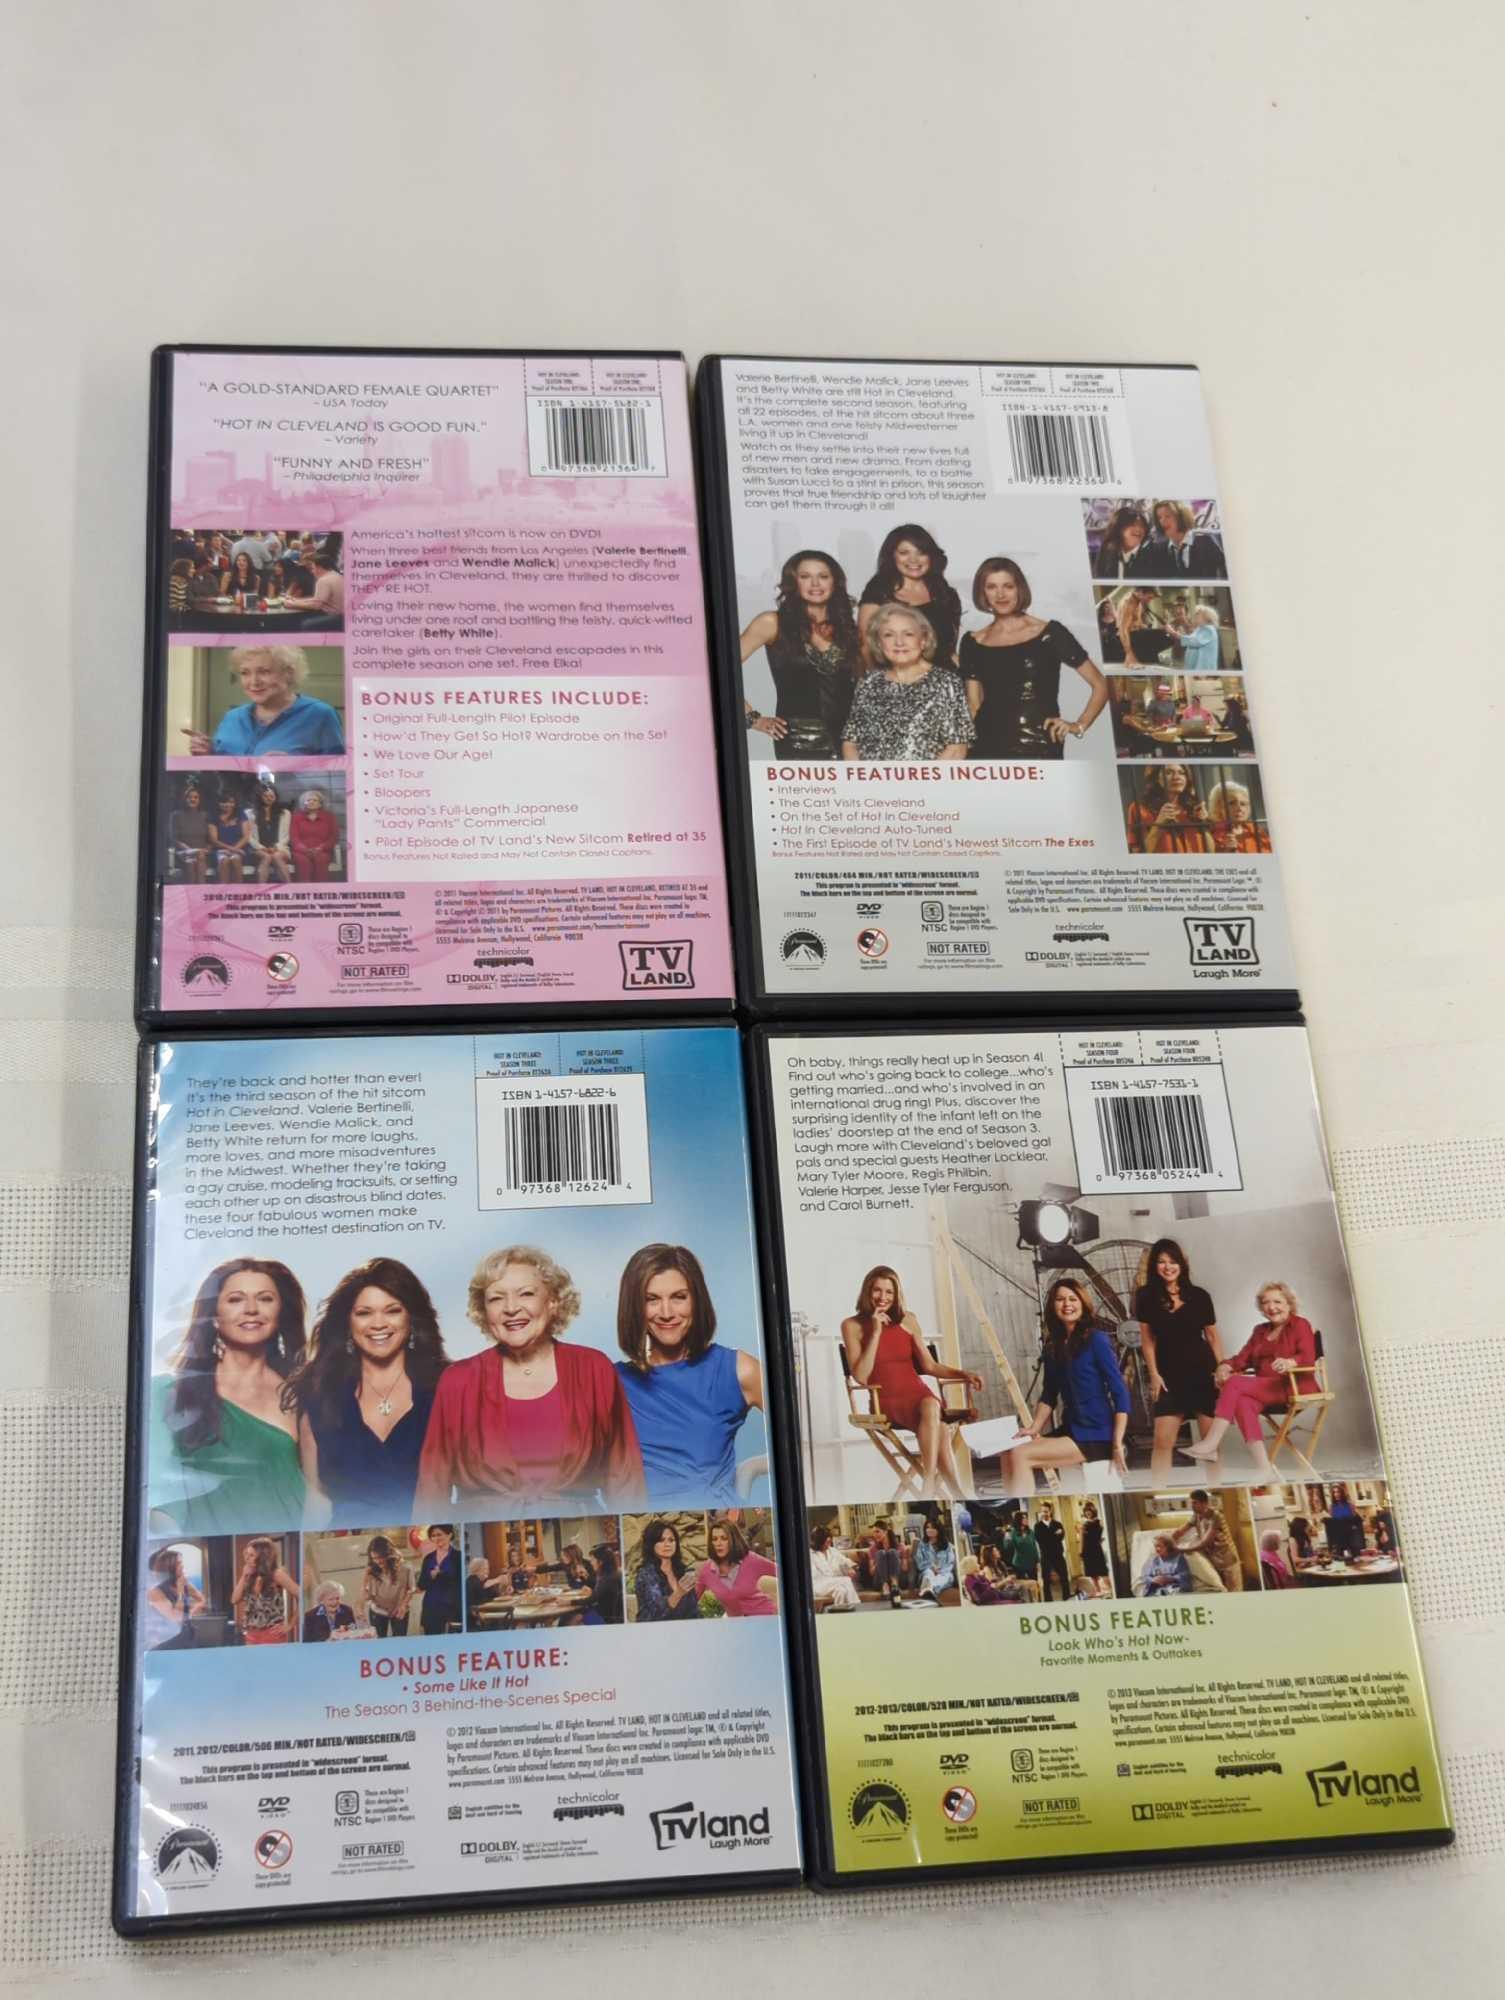 DVD SET "HOT IN CLEVELAND" SEASONS 1-4